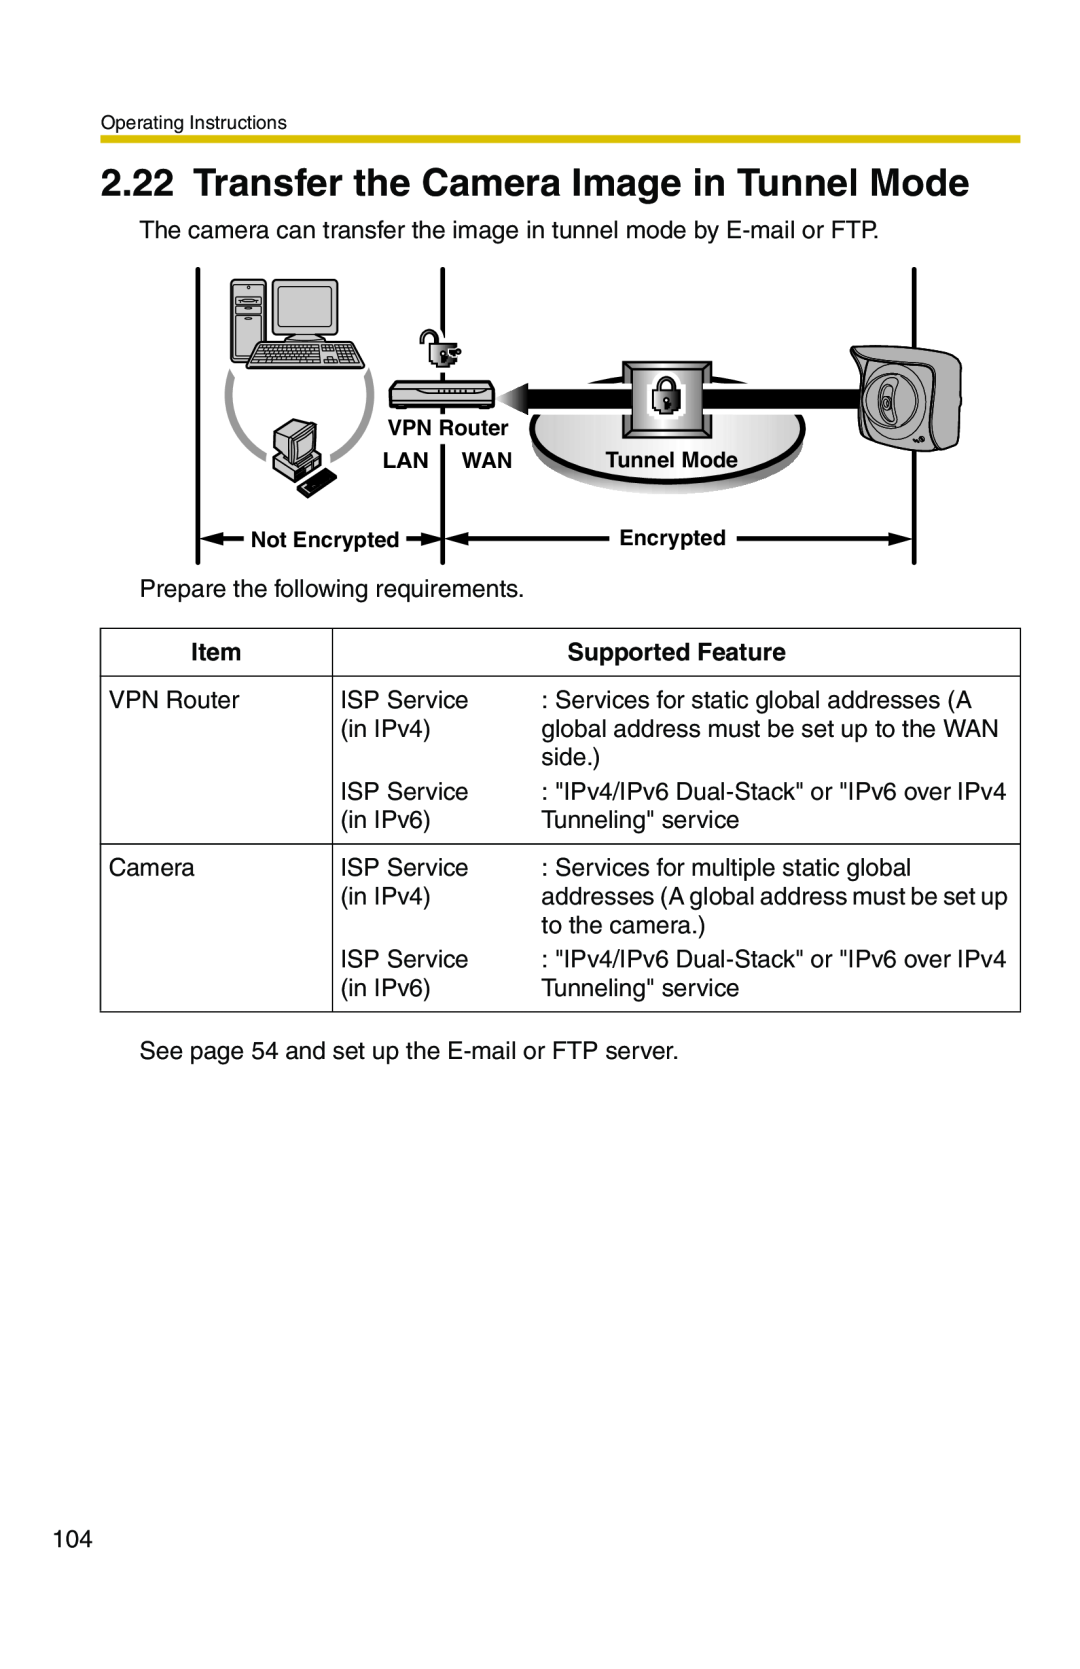 Panasonic BB-HCM331A operating instructions Transfer the Camera Image in Tunnel Mode, Supported Feature 